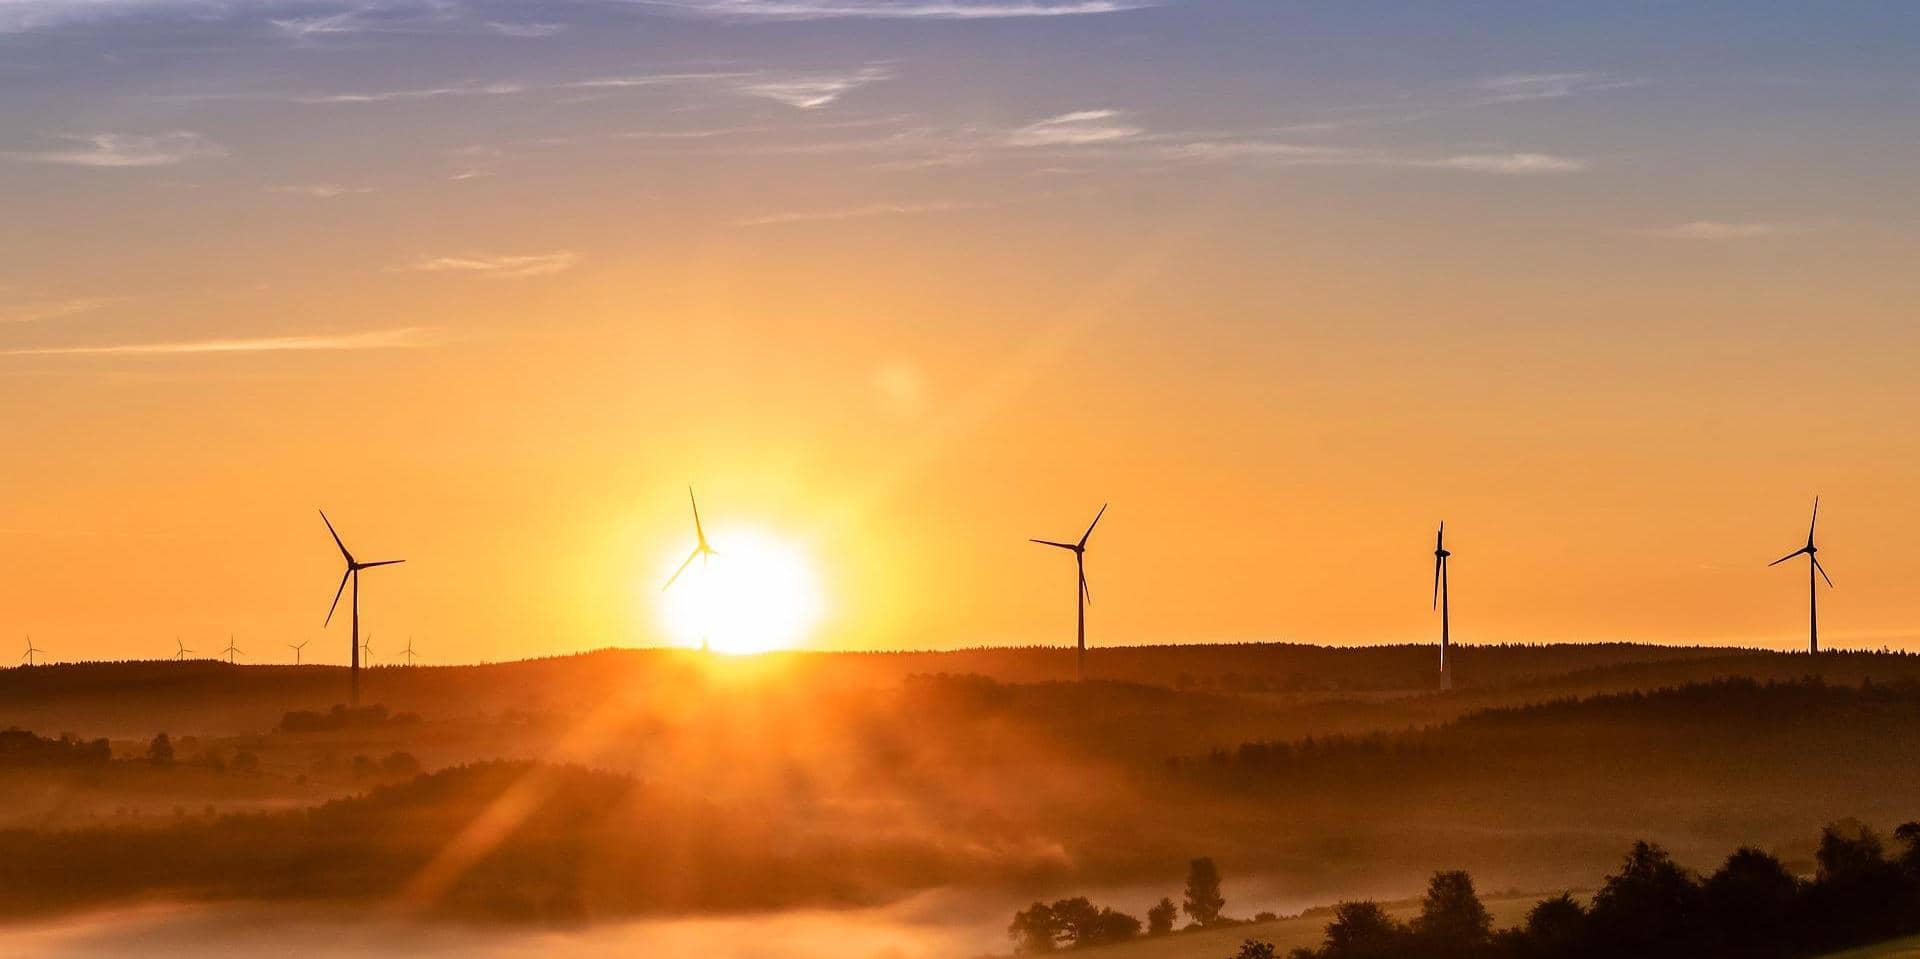 Sunrise over a misty landscape with silhouettes of wind turbines on the horizon, symbolizing action against spiralling energy prices.